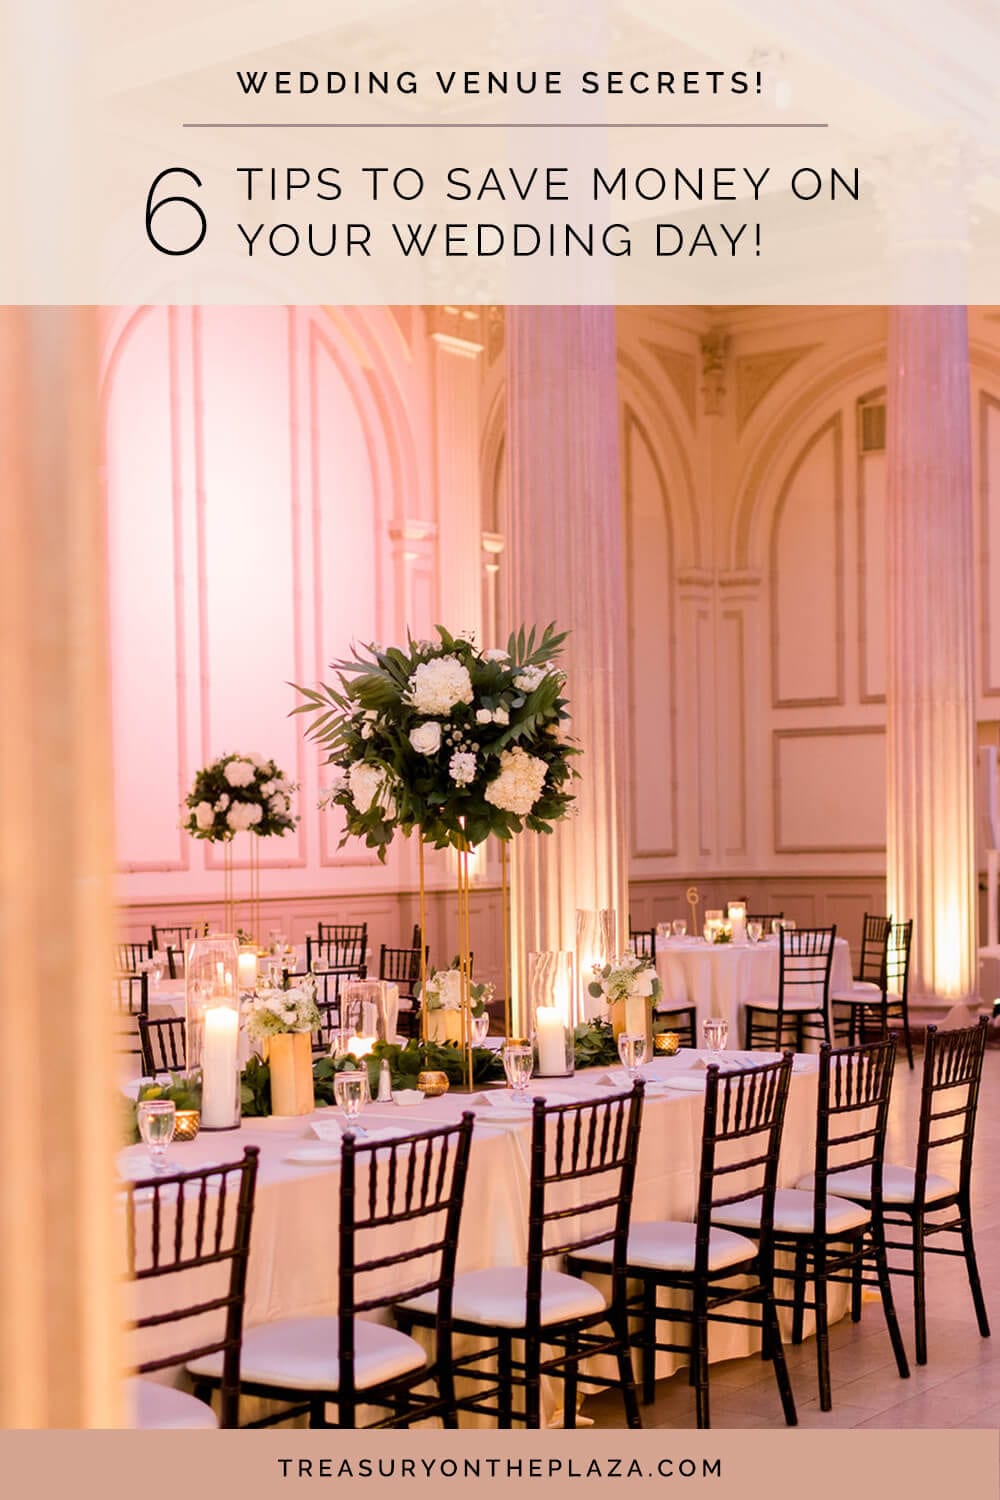 Saving Money on Your Wedding Day | Wedding Cost Saving Tips From The Wedding Venue Experts at The Treasury Venue Collection